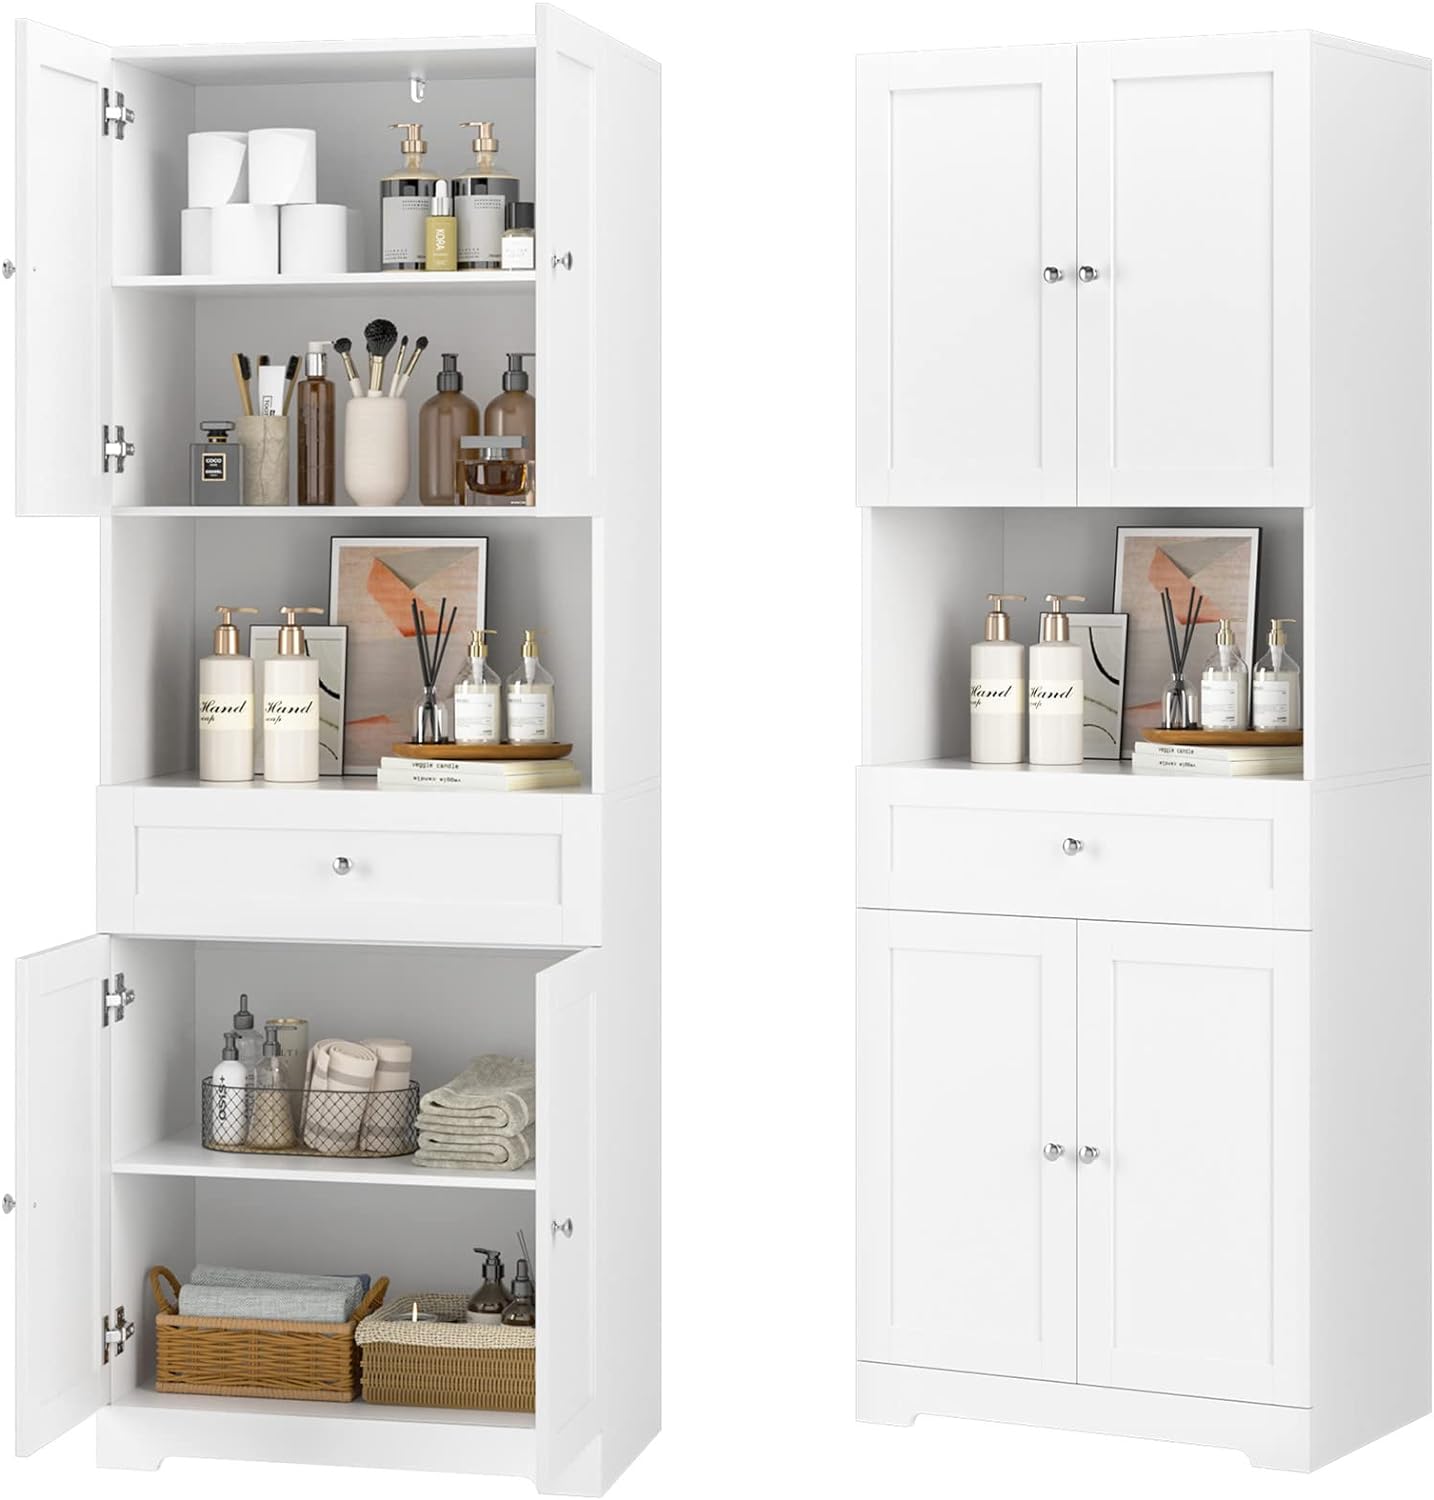 HIFIT Tall Bathroom Storage Cabinets, Modern Linen Storage Cabinet with 4 Doors & Shelves & Drawer, 67 H Tall Storage Cabinet Freestanding for Bathroom, Living Room, Kitchen, Pantry, White